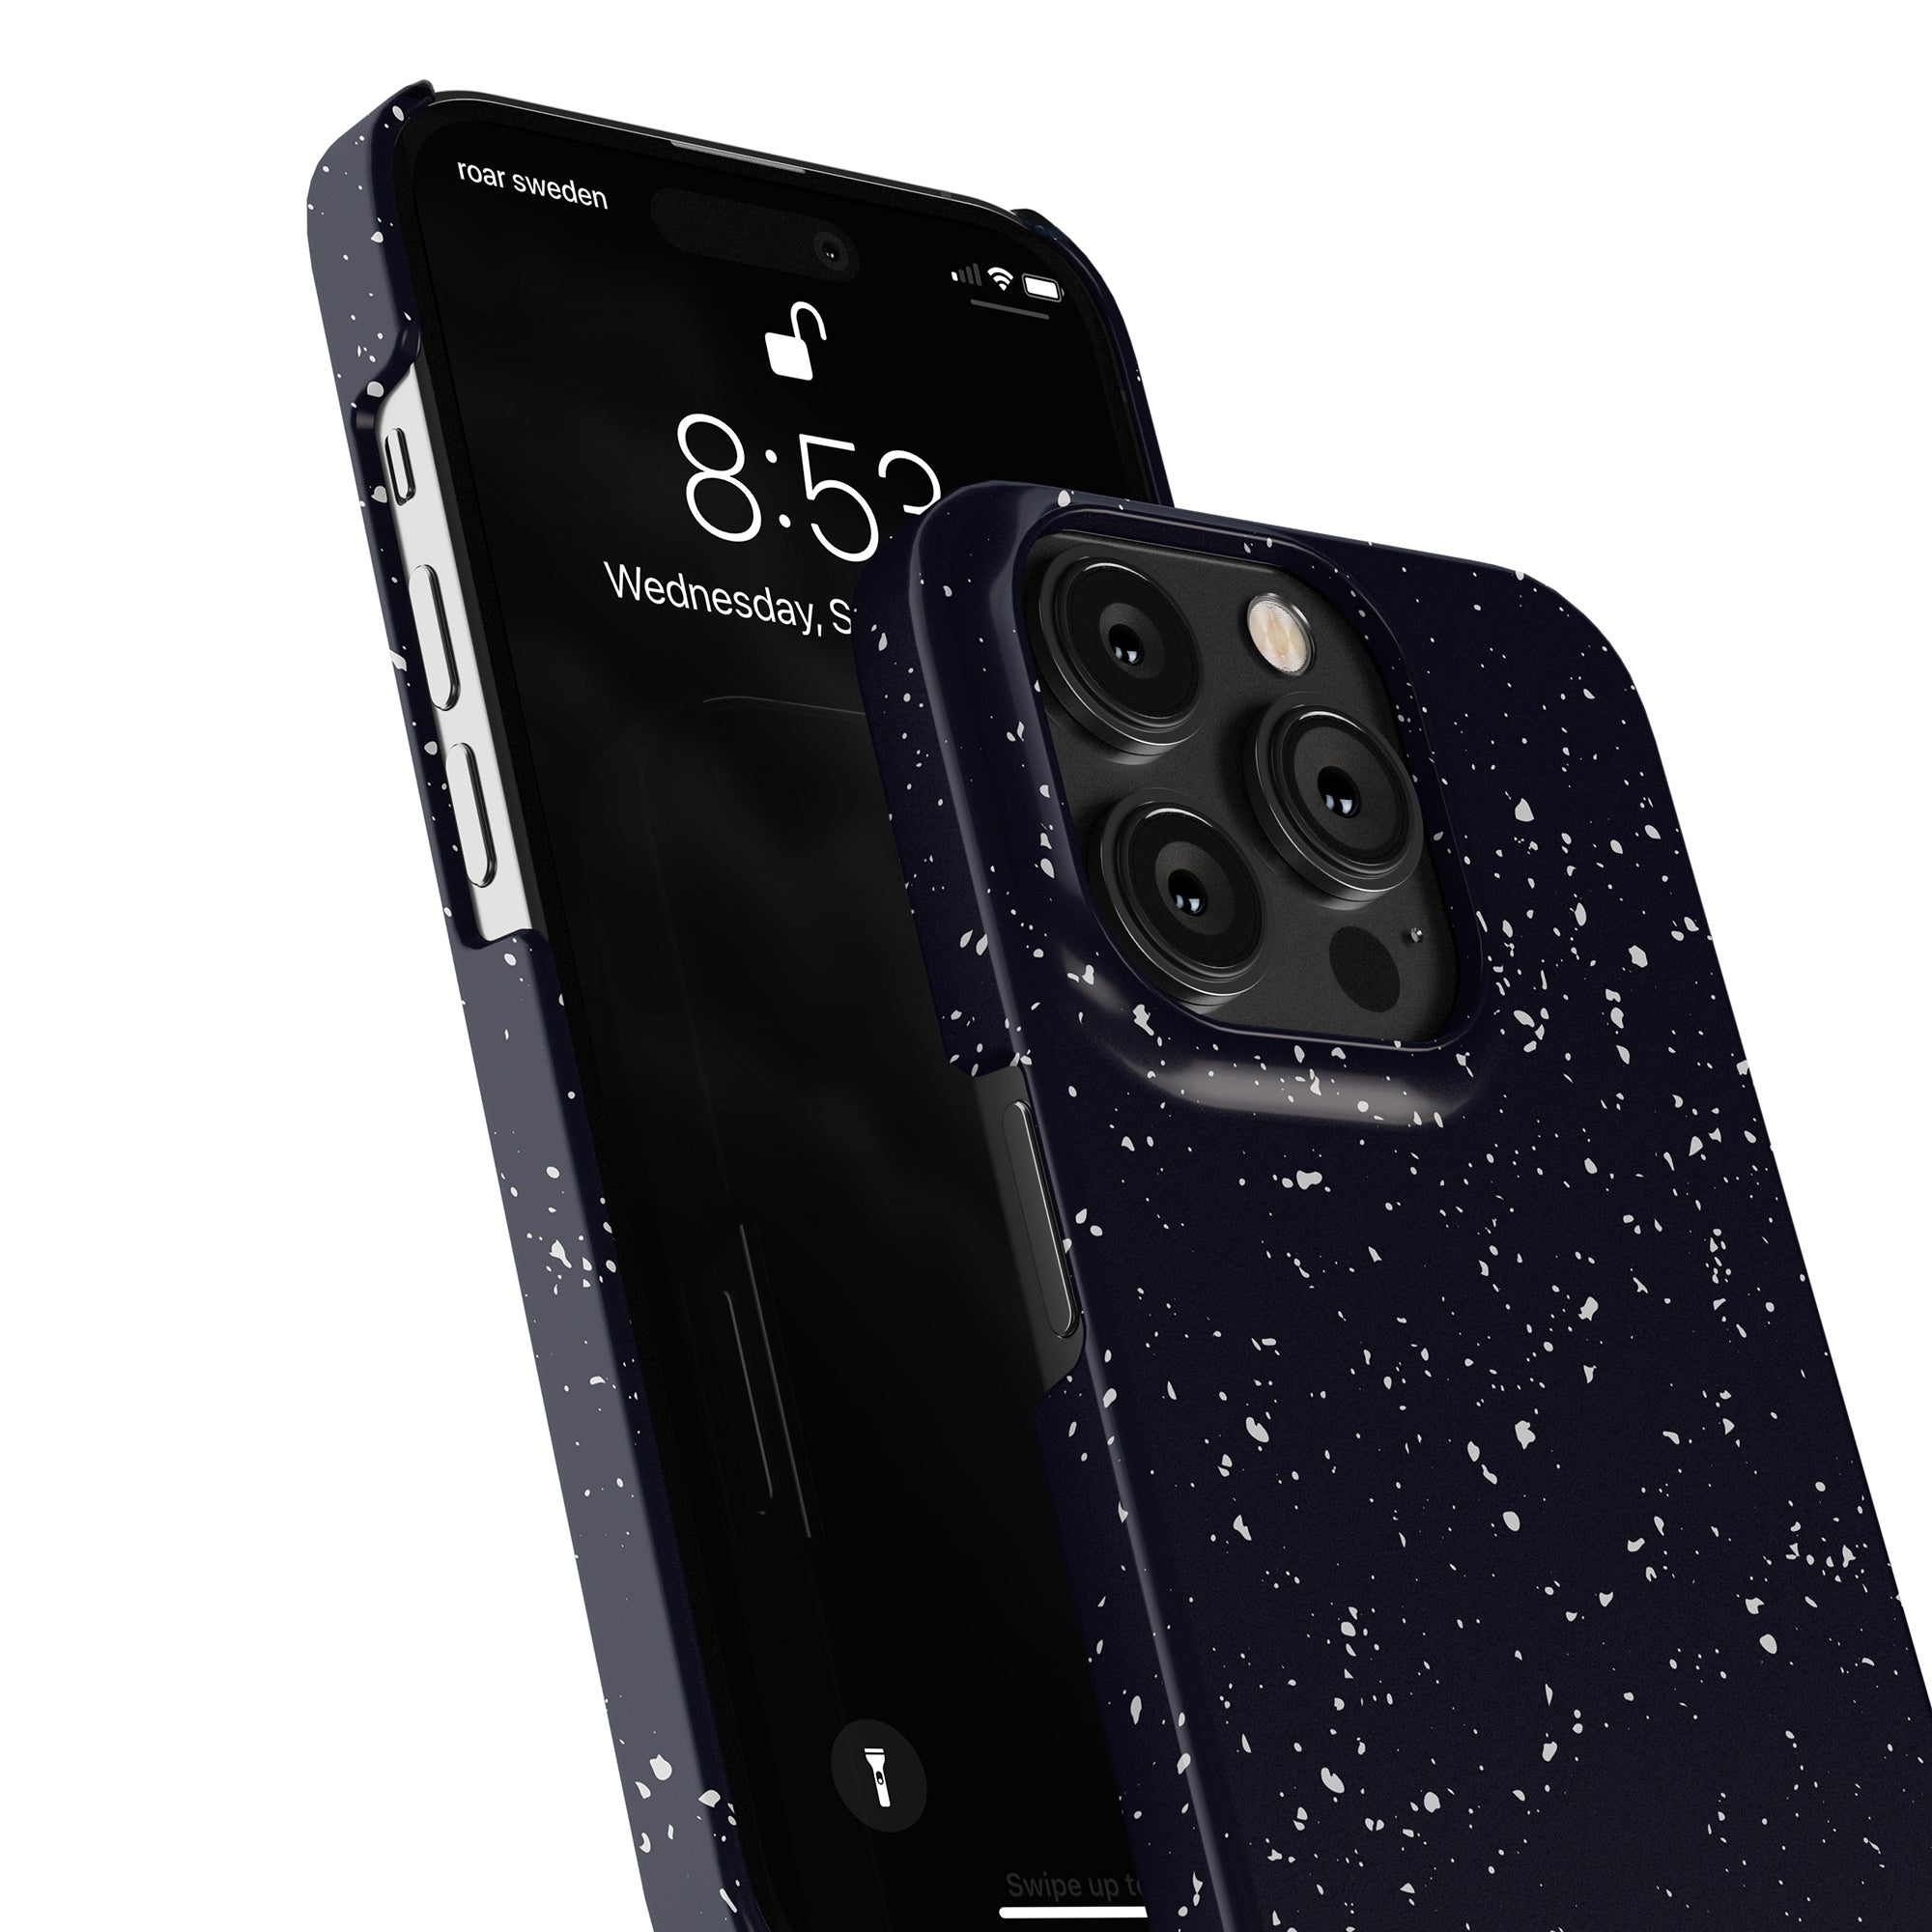 Since there were no specific keywords provided to integrate into your original description, I'll select a relevant keyword from the context and modify the description accordingly: Night Stars - Slim case with a triple-camera system next to it.